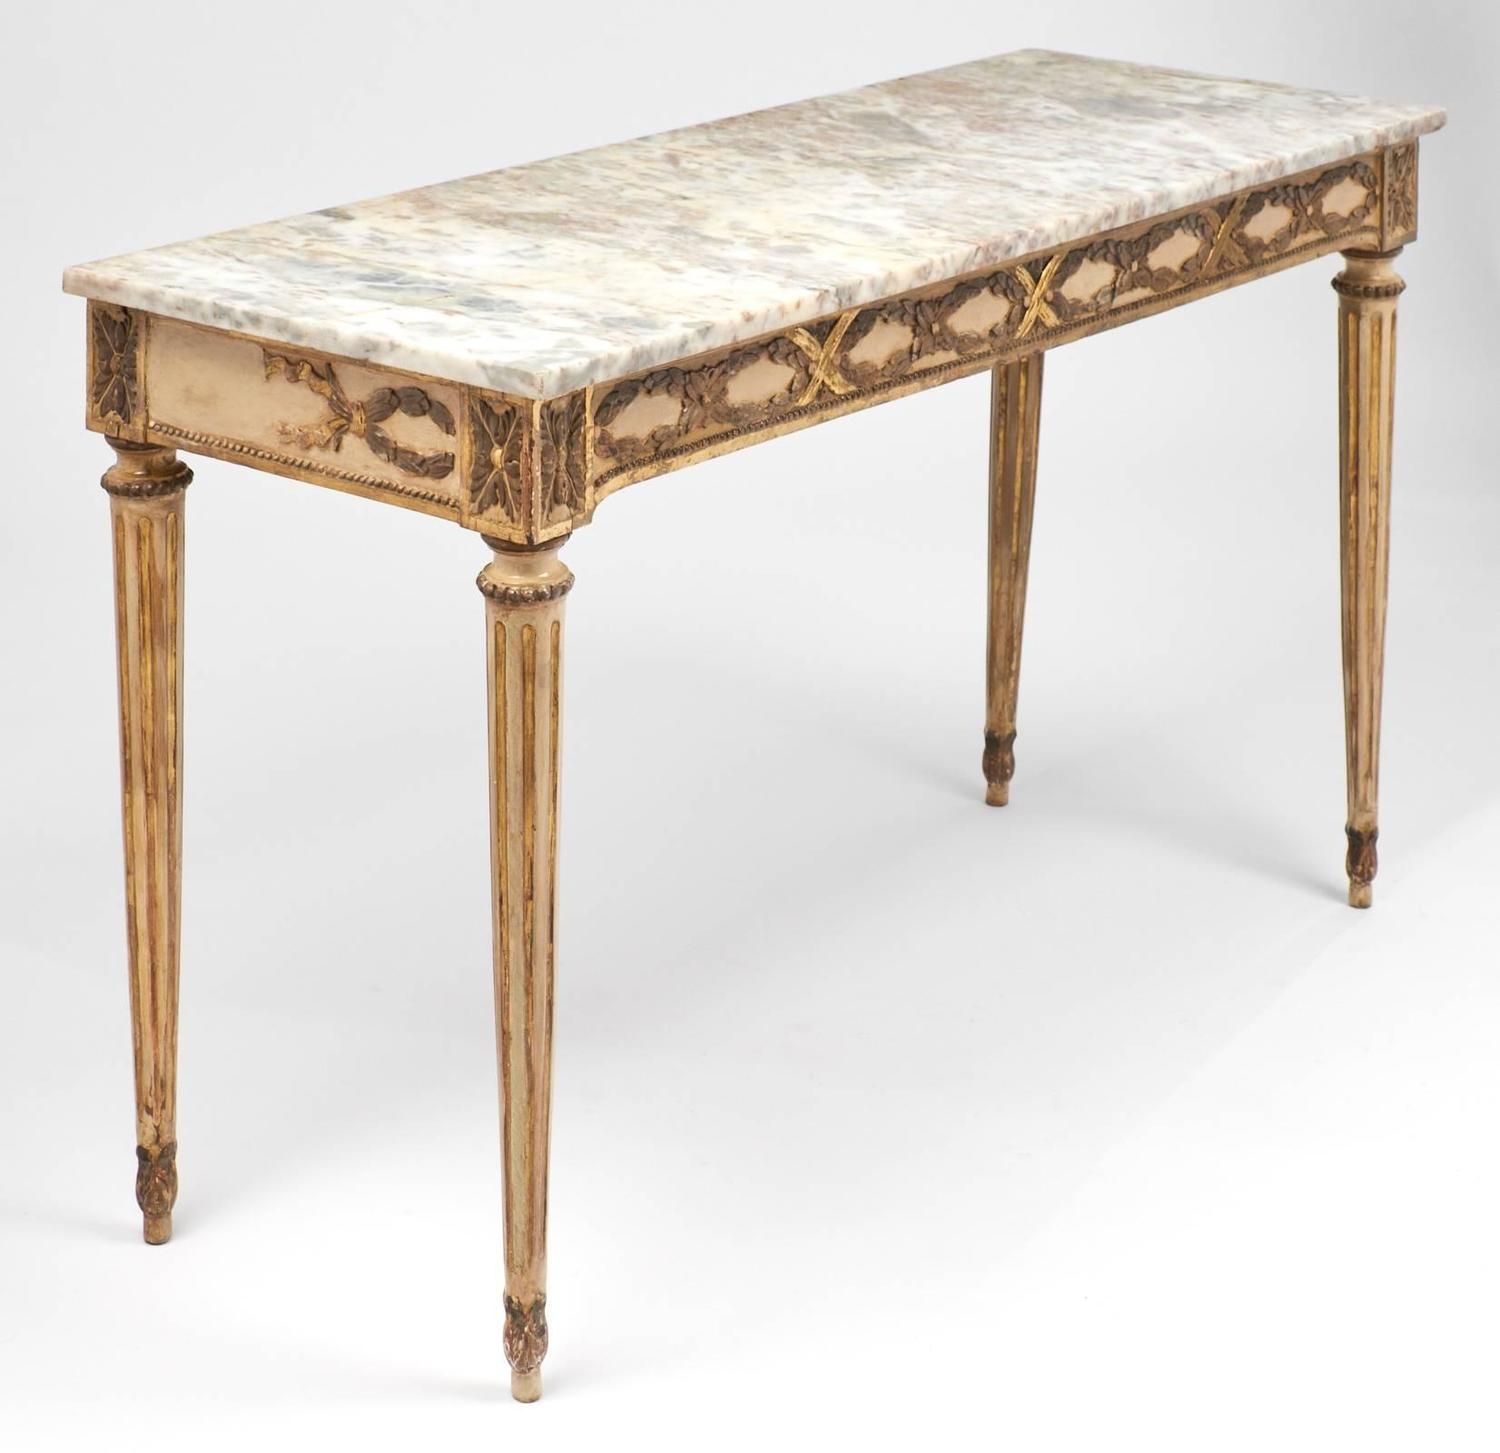 Antique Pair Of Italian Marble Top Console Tables For Sale Intended For Marble Console Tables (View 9 of 20)